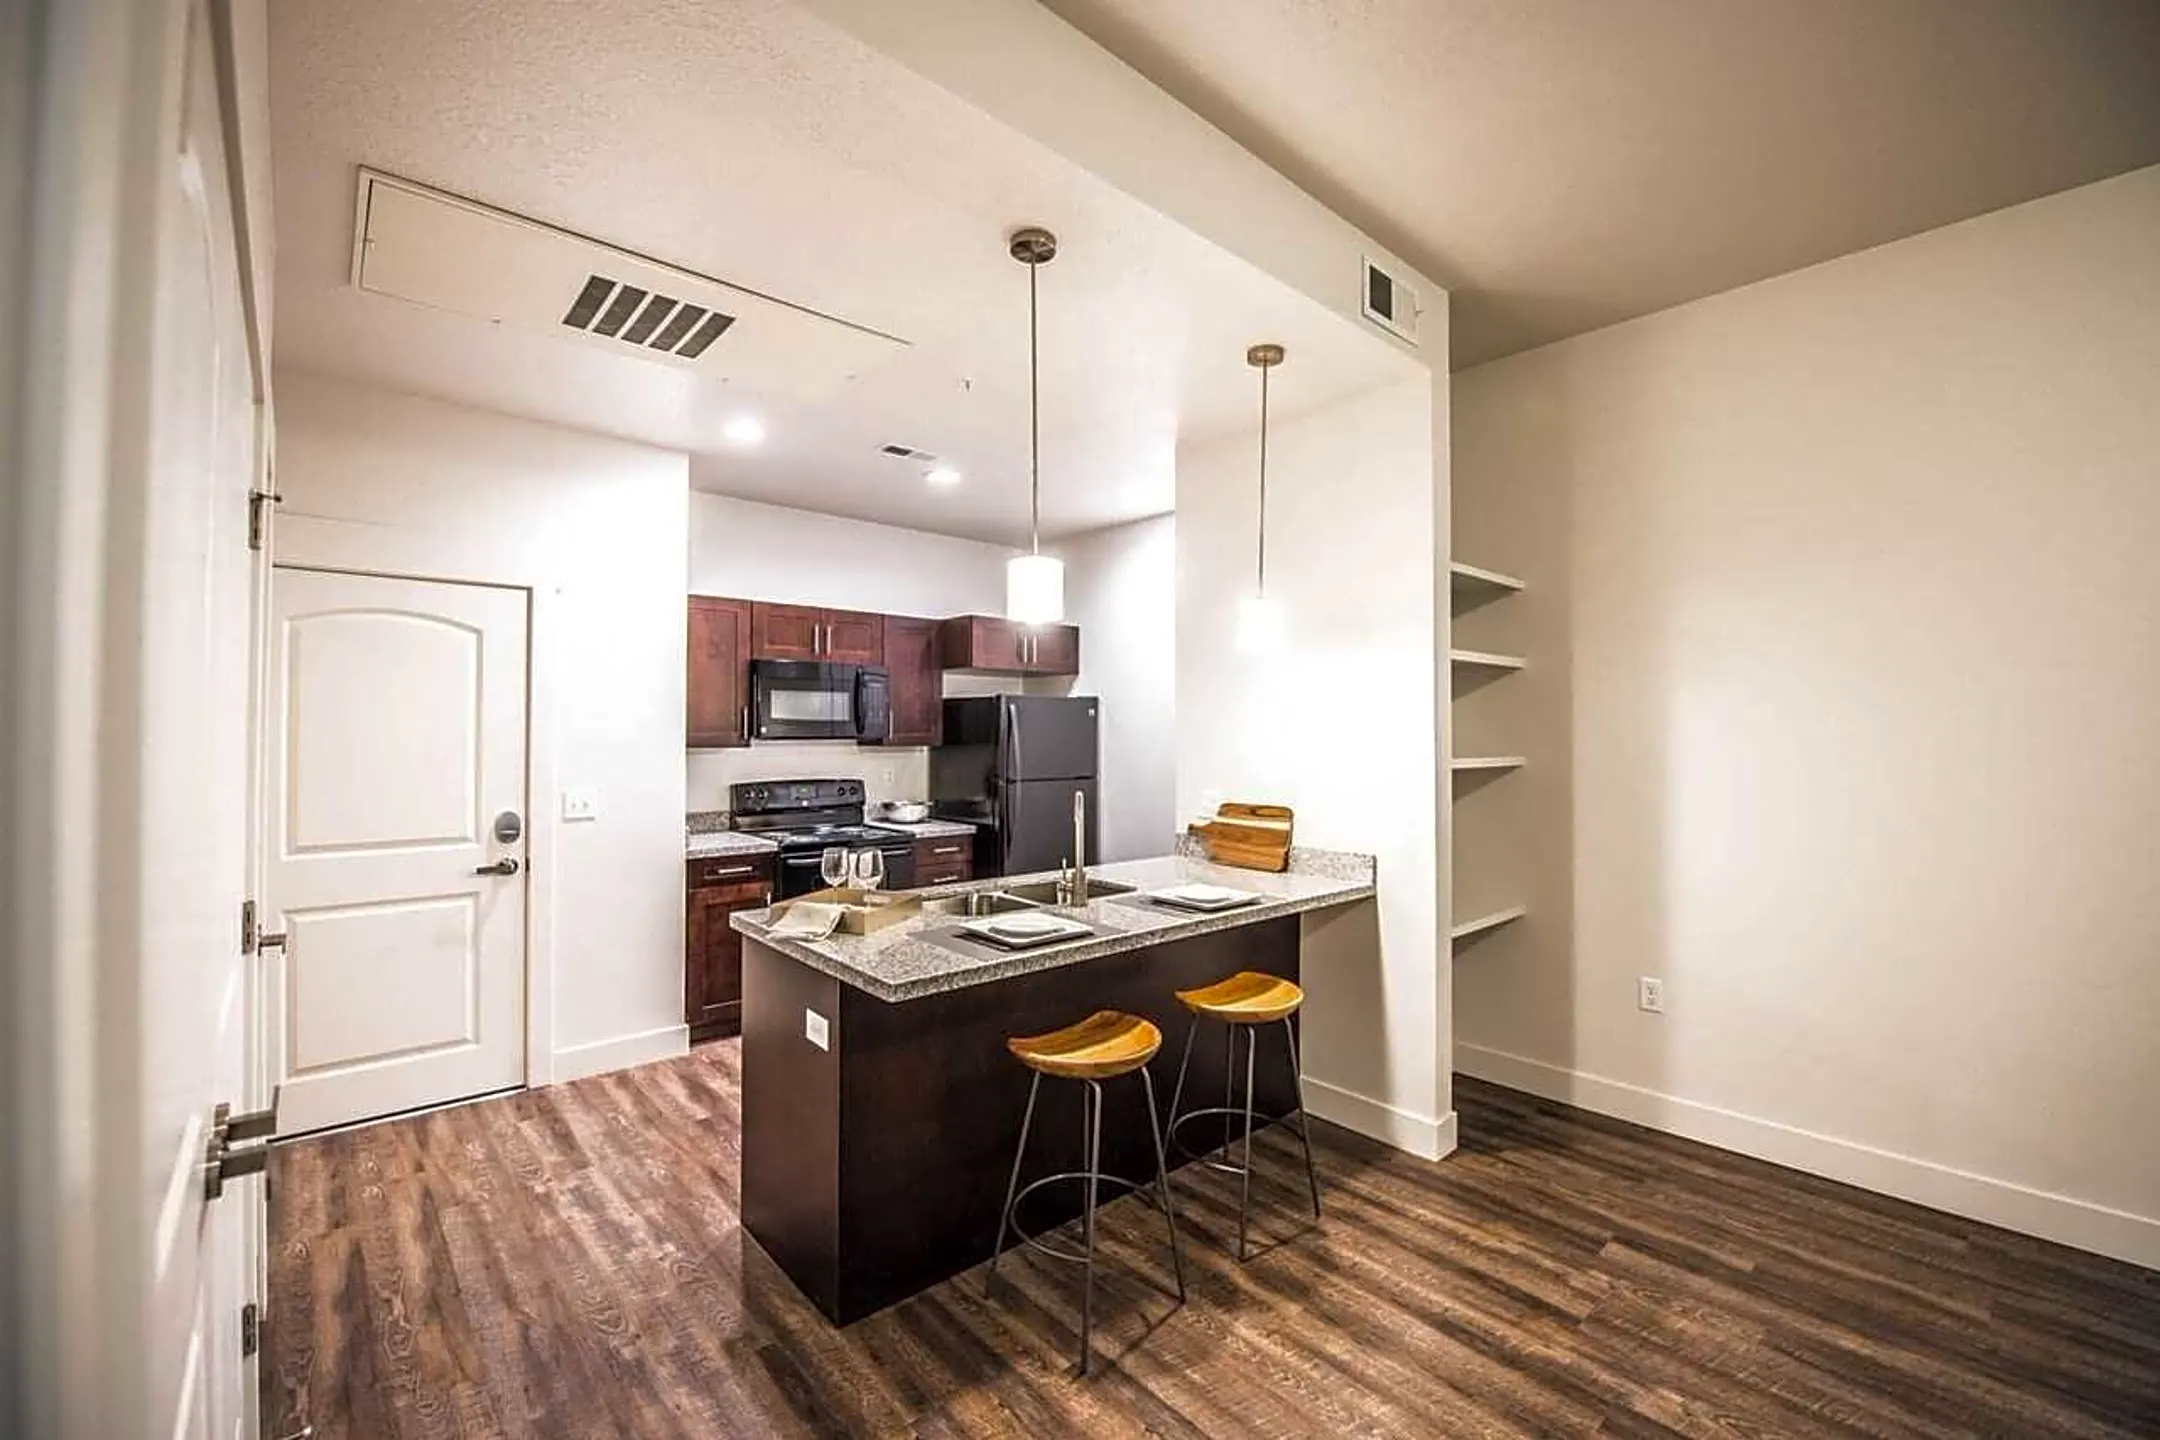 Kitchen - City Centre Apartments - Clearfield, UT